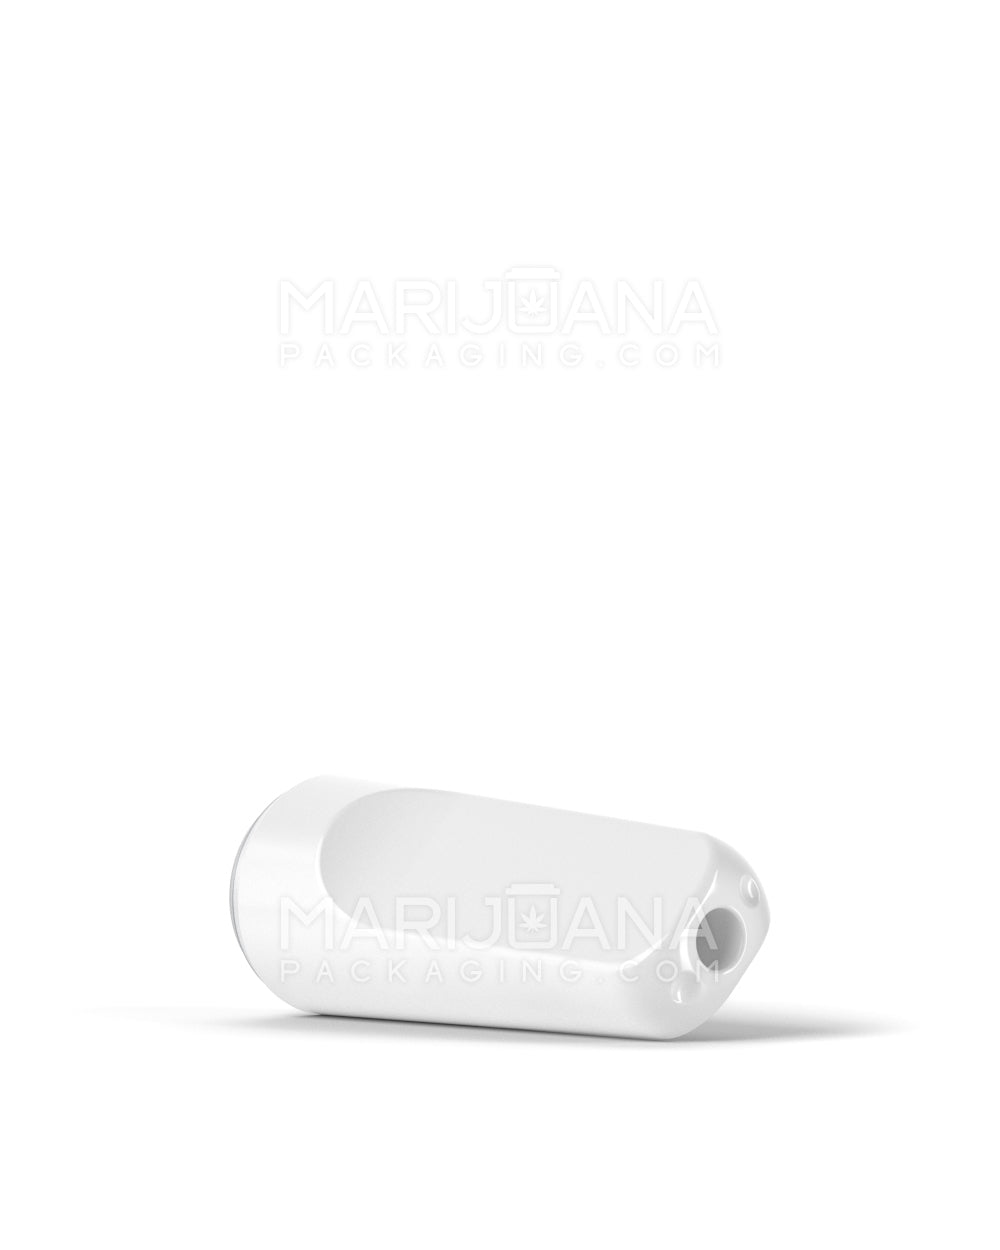 RAE | Flat Vape Mouthpiece for Screw On Plastic Cartridges | White Plastic - Screw On - 100 Count